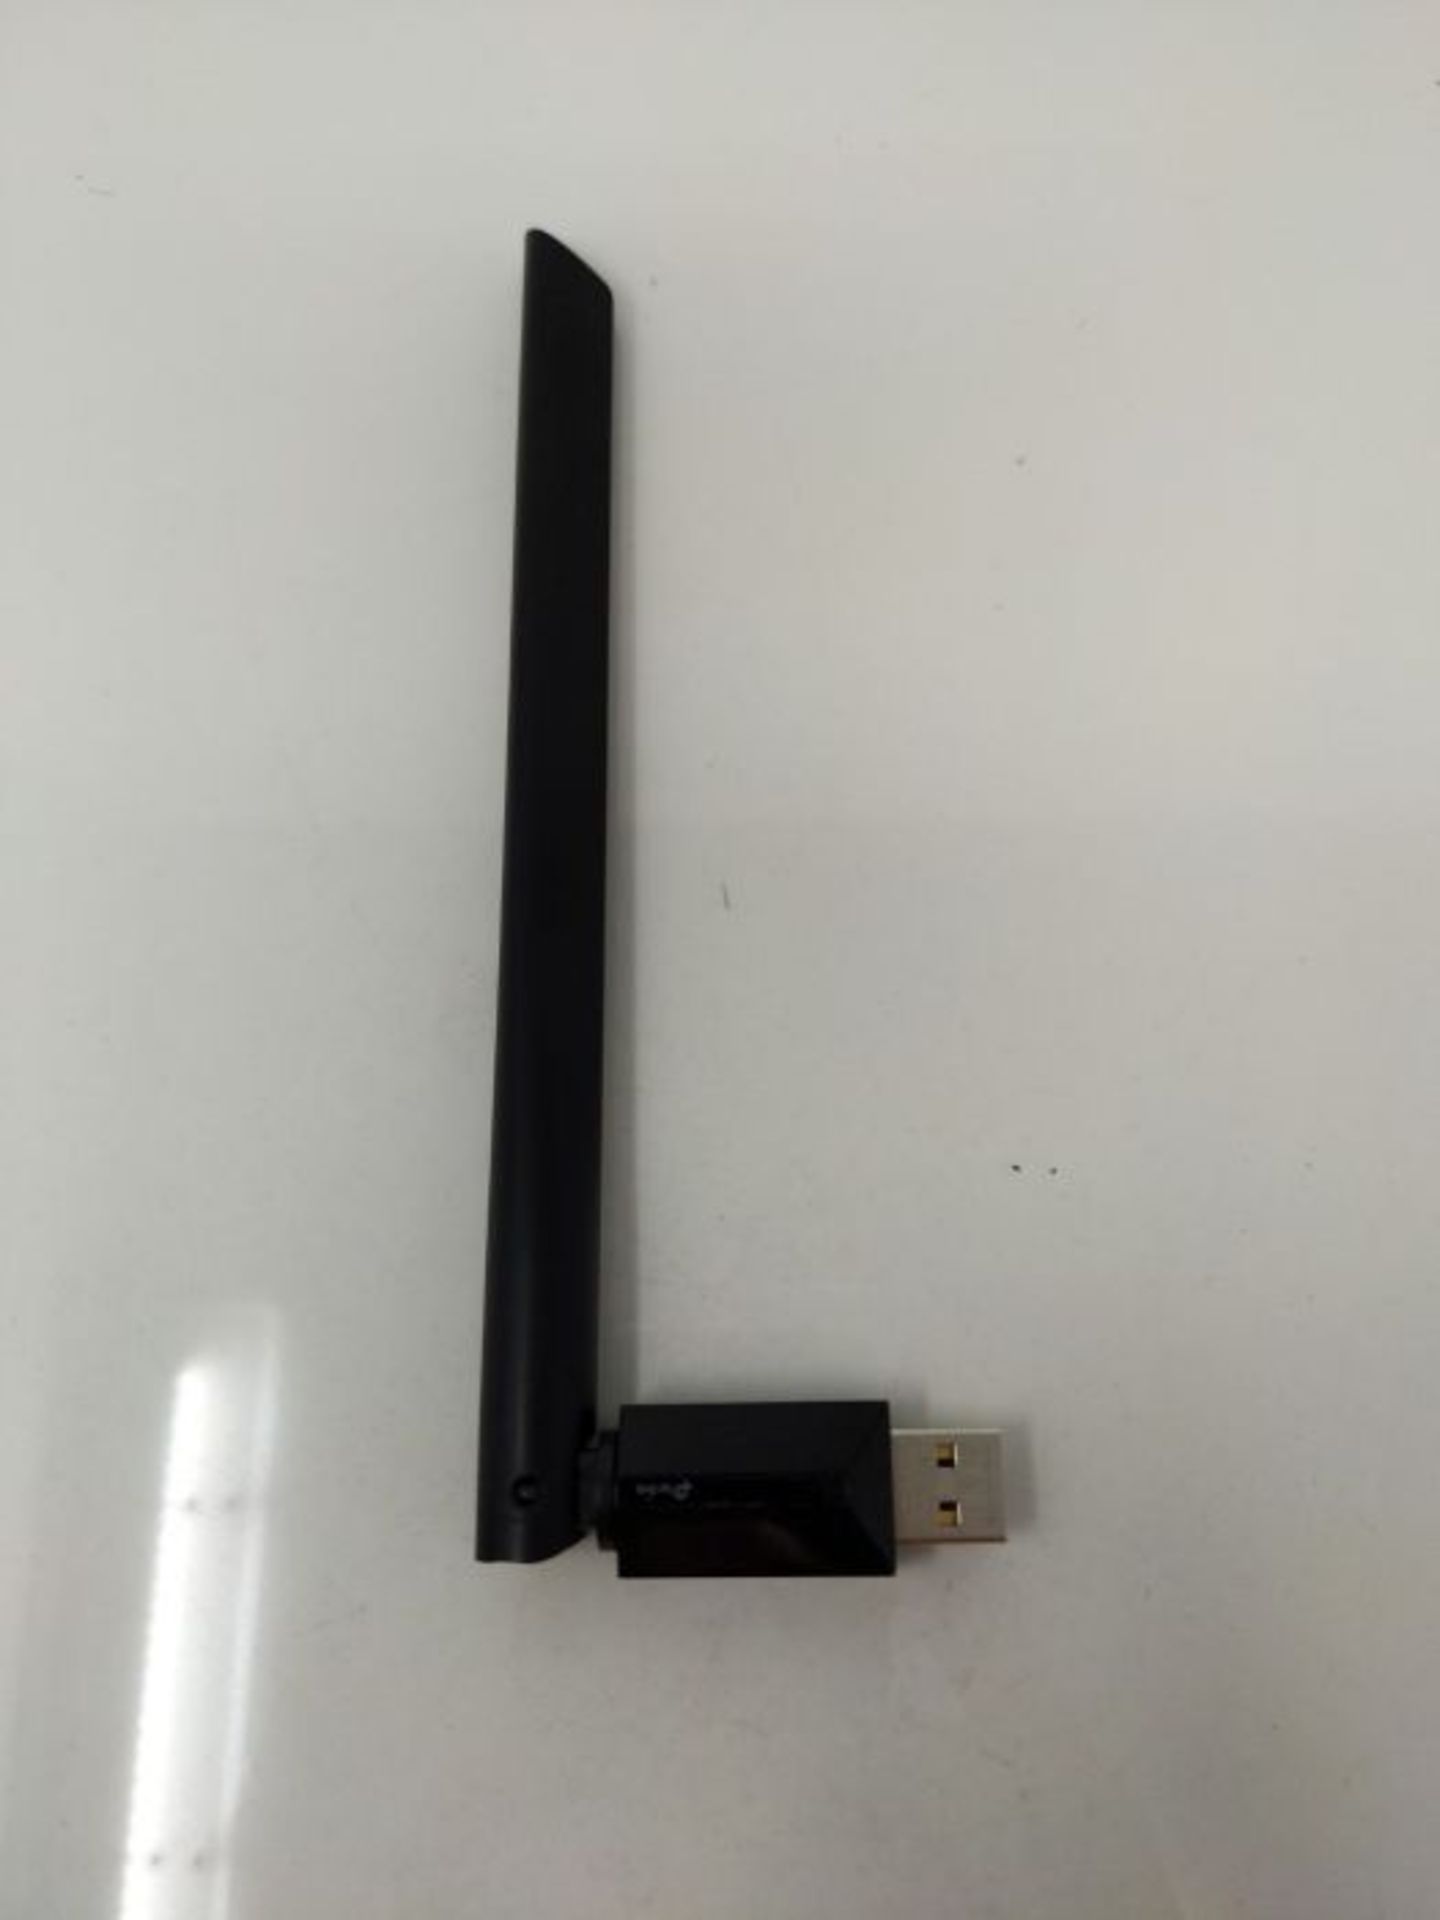 TP-LINK USB Dongle - Image 3 of 3